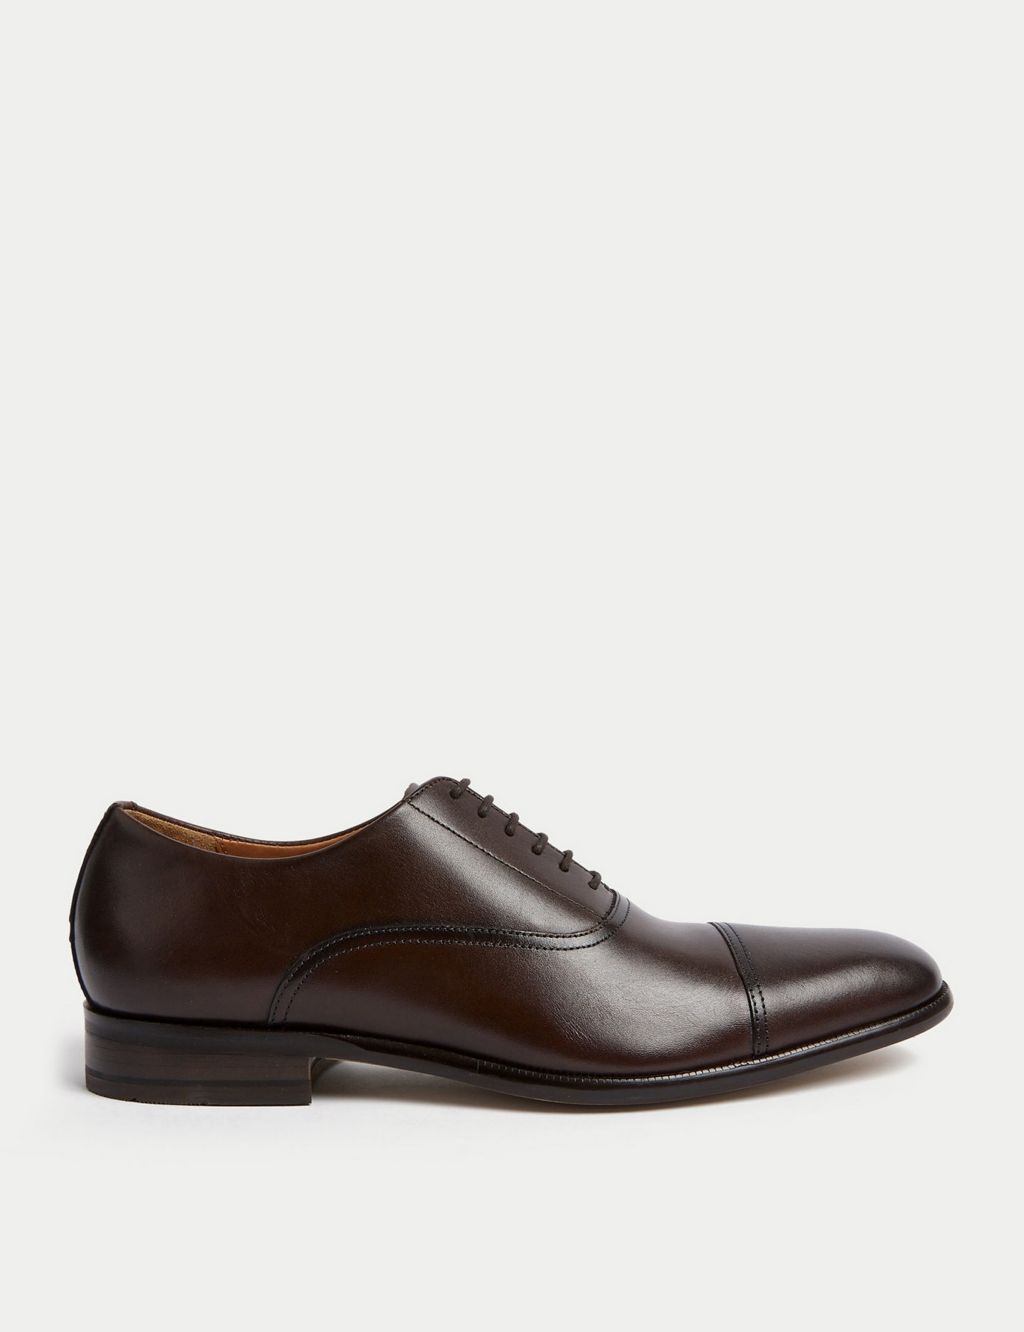 Leather Oxford Shoes image 1